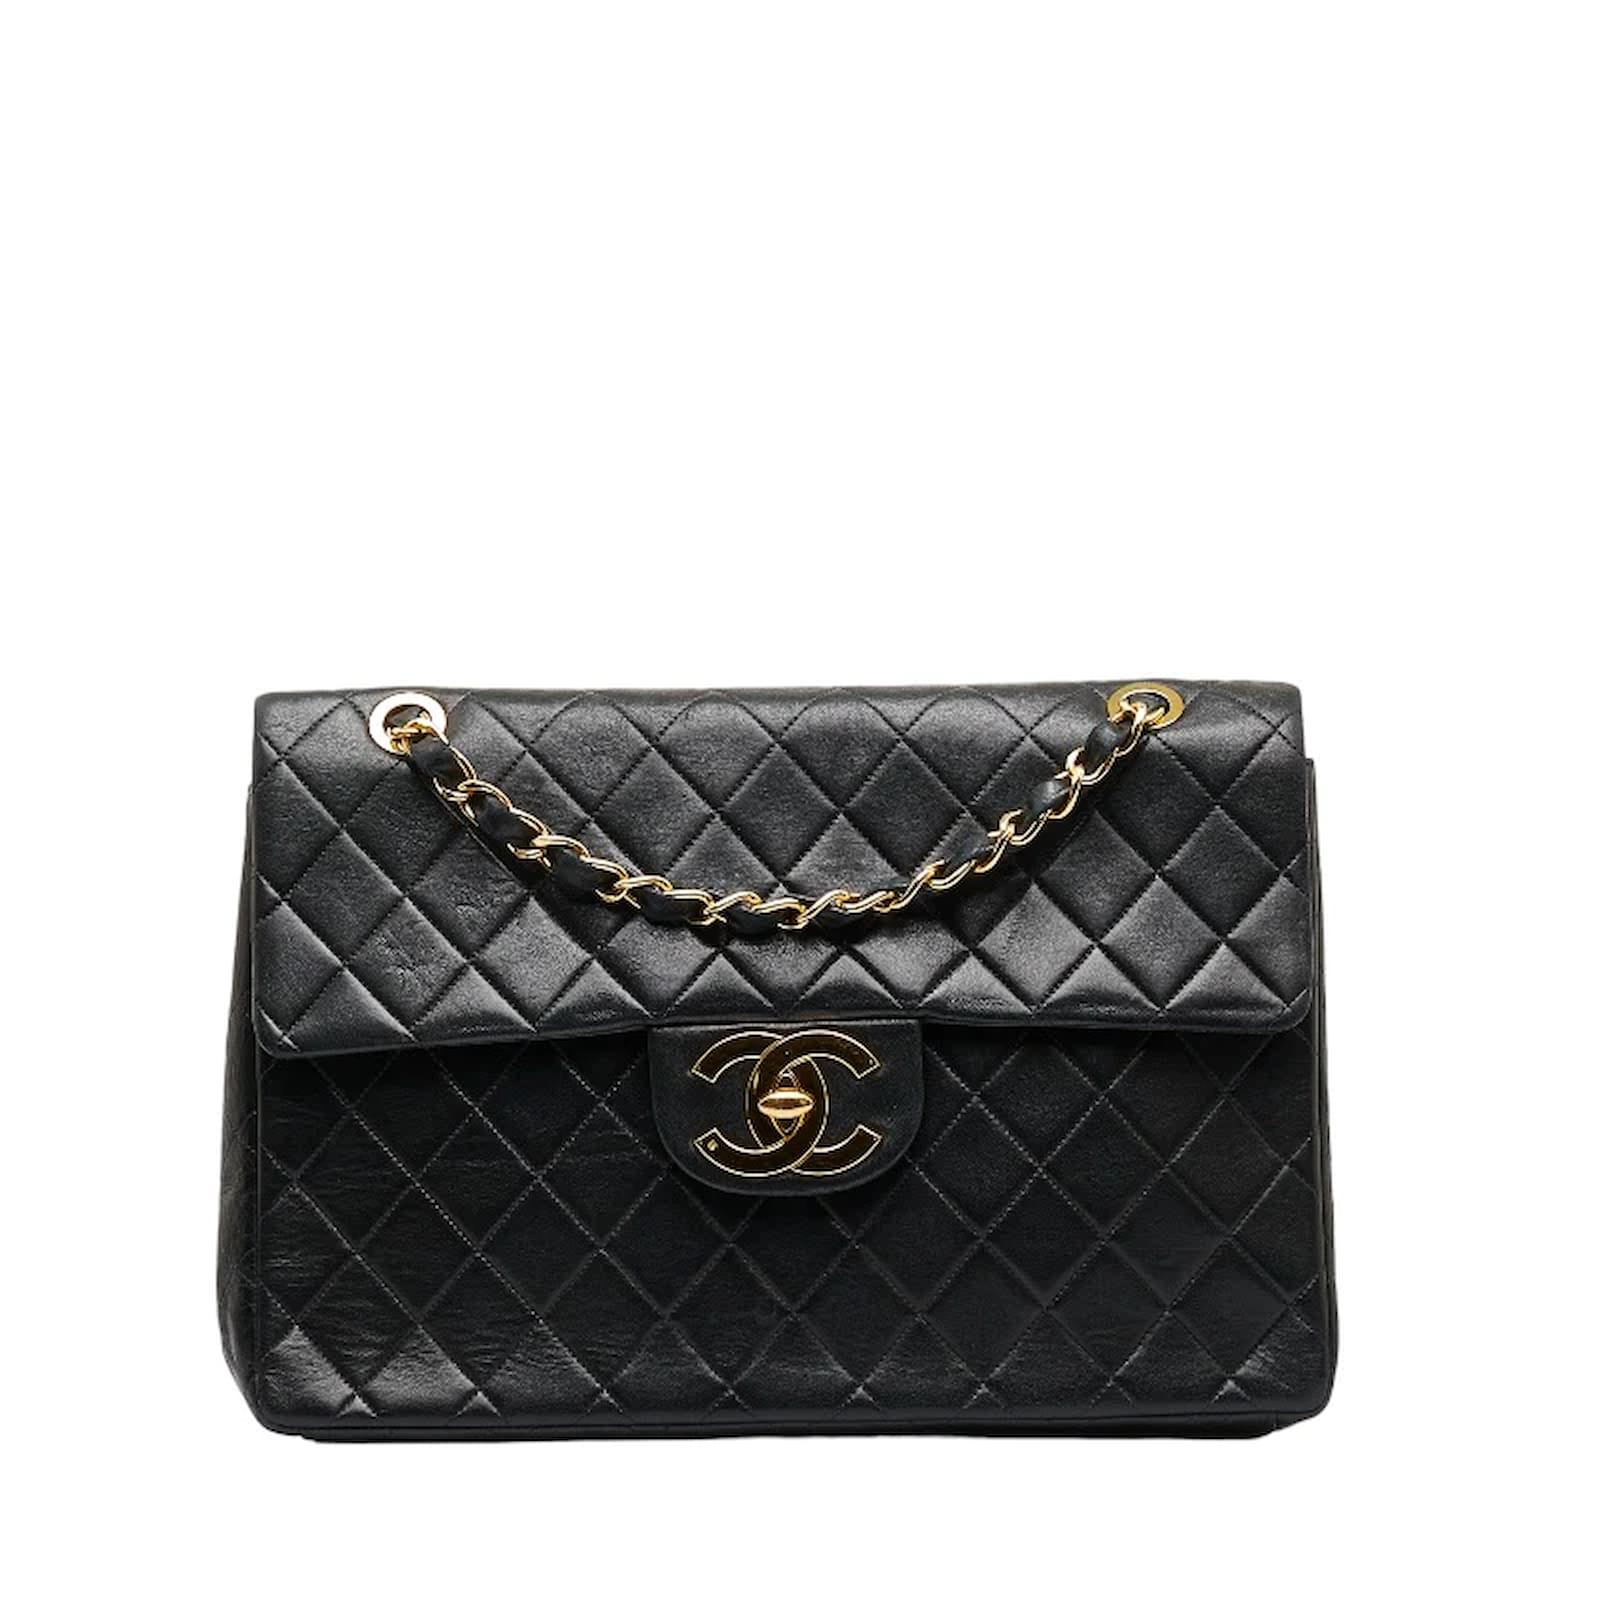 CHANEL Clutch Bag Quilted W 34cm Leather Black Japan [Used]